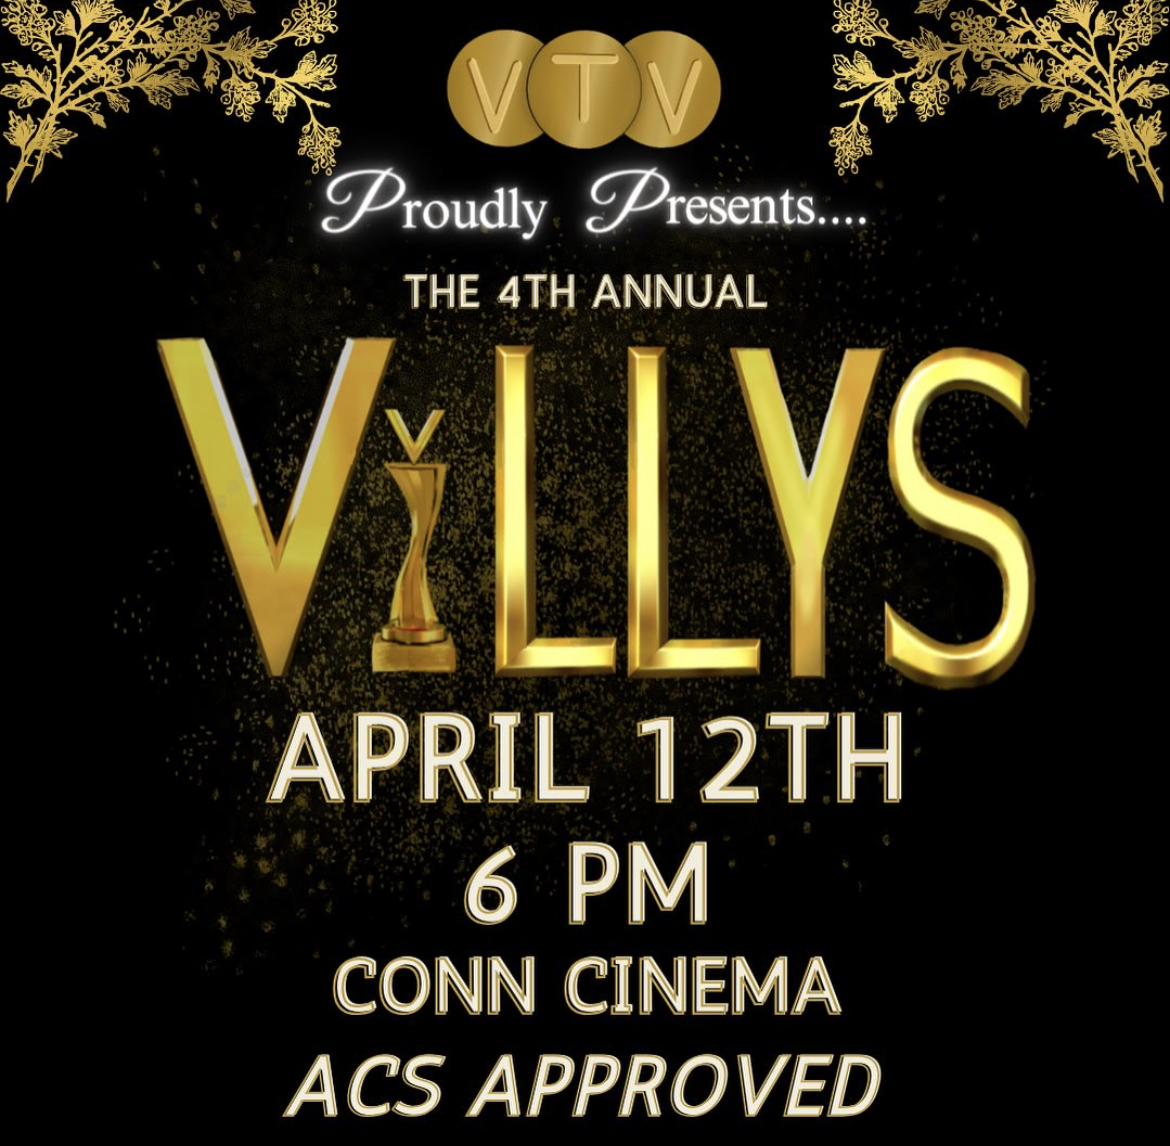 Villanova+Television+is+holding+the+fourth+annual+Villys+Film+Festival+on+Apr.+12.